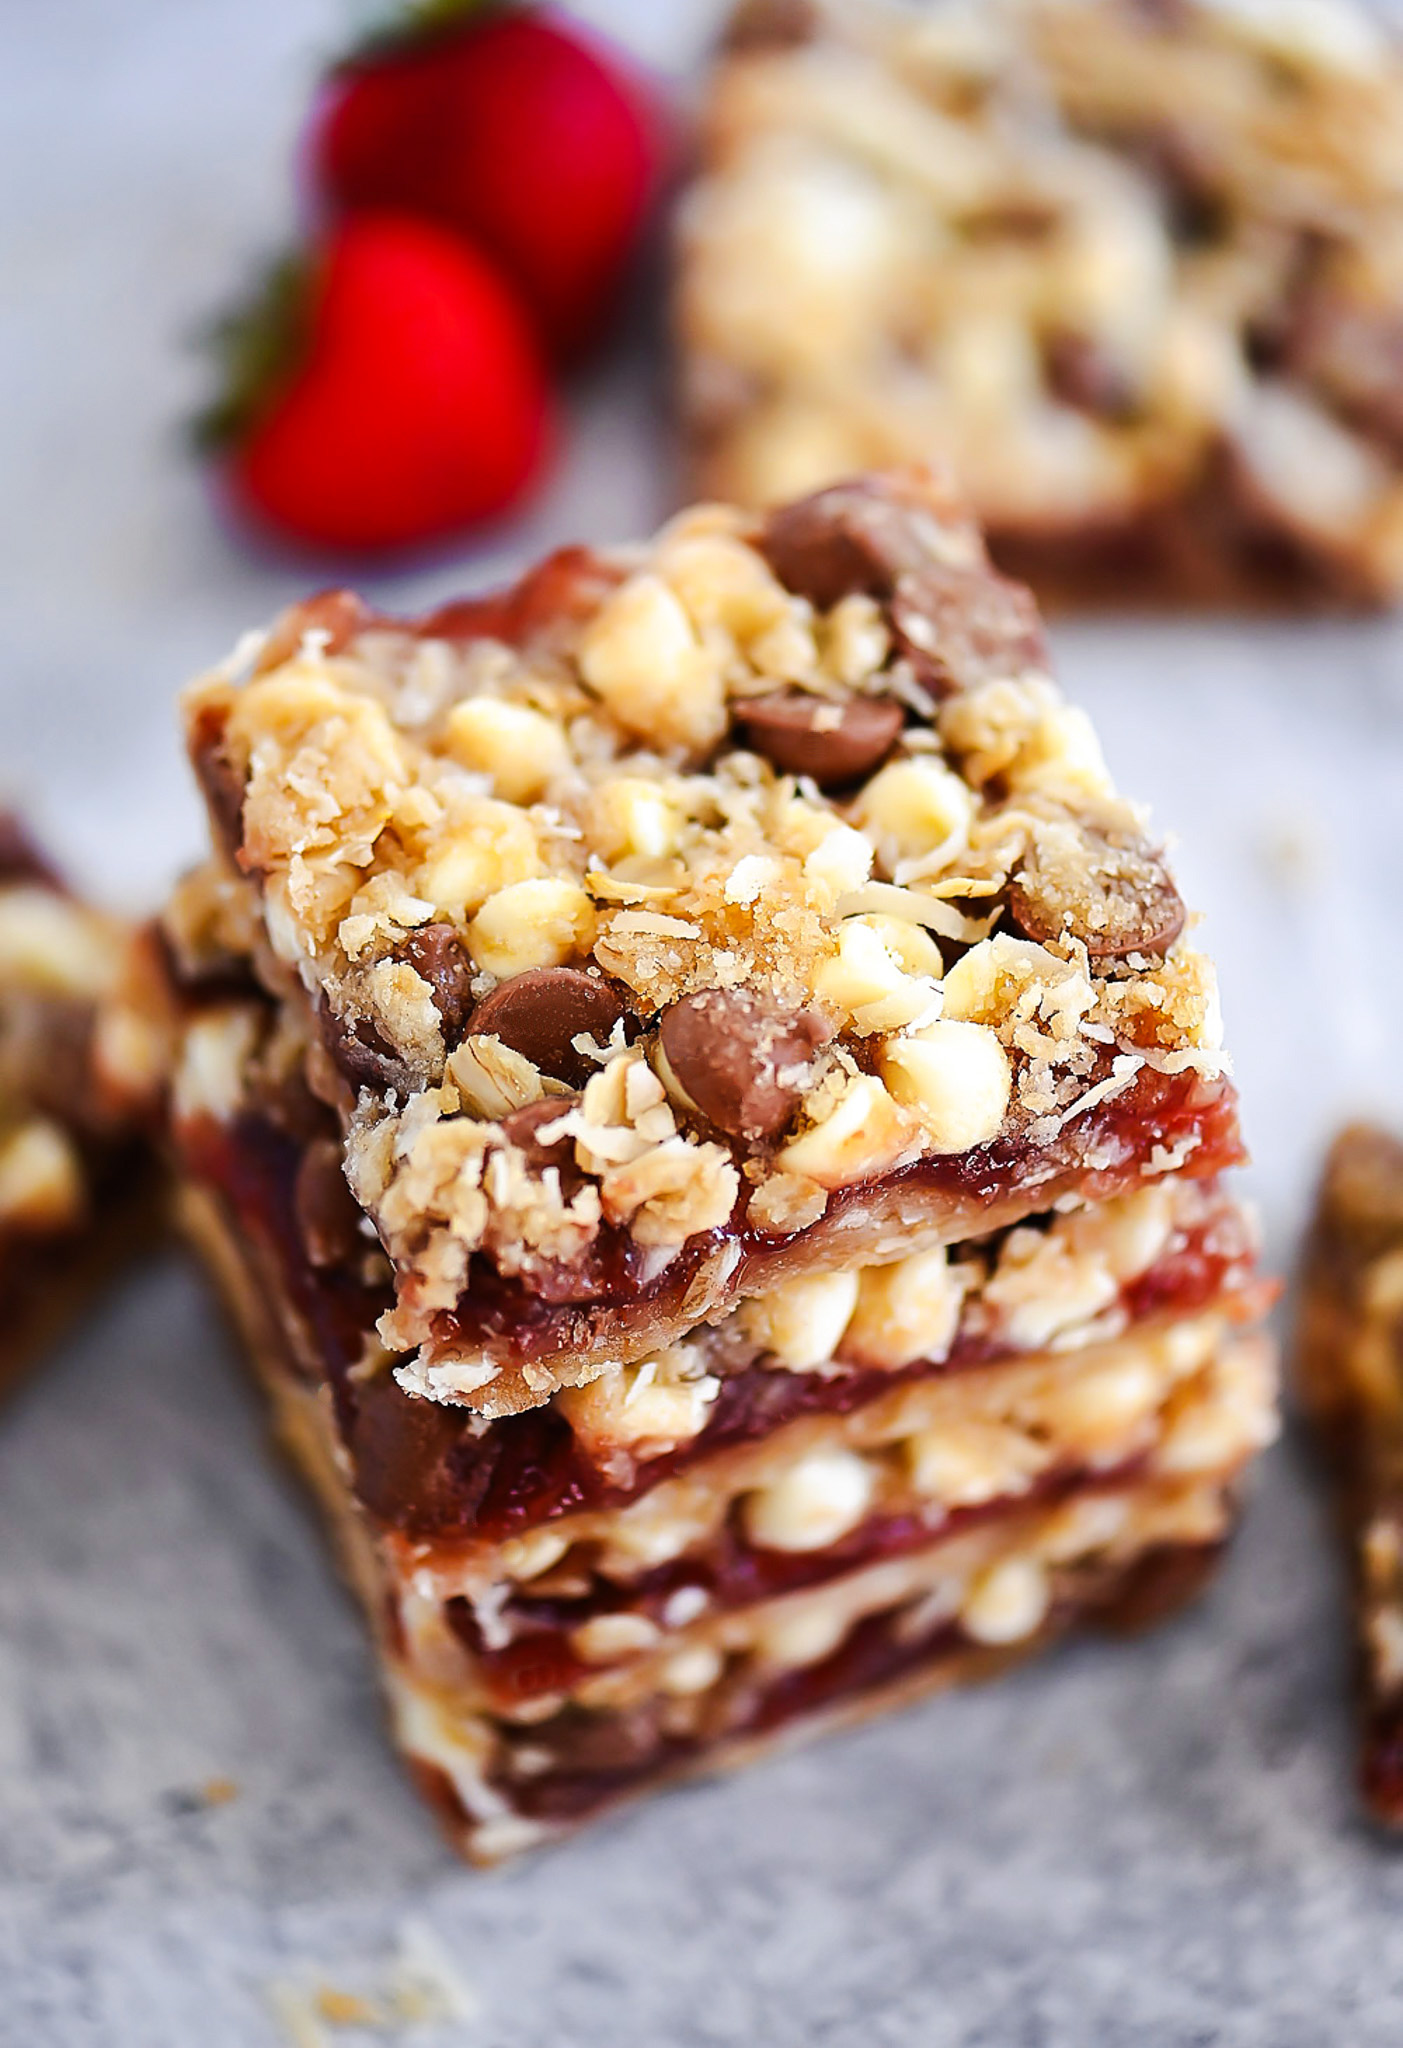 Bliss Bars with strawberry jam and chocolate.